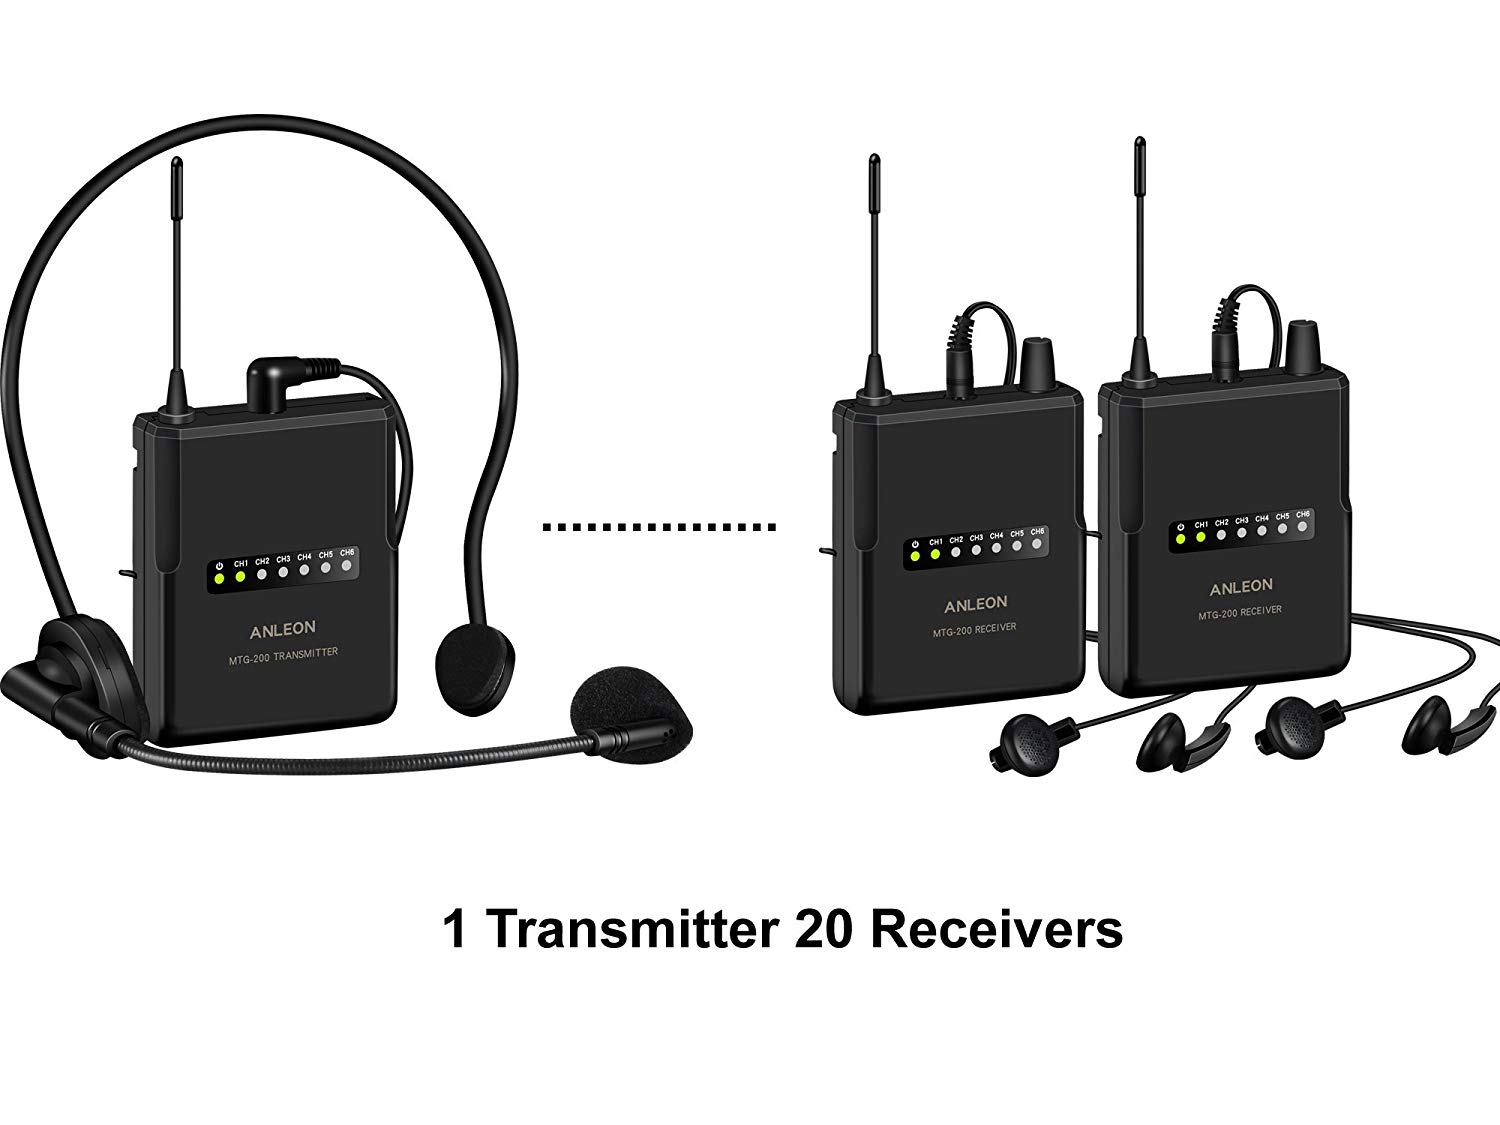 ANLEON MTG-200 wireless tour guide language translation system Translation Headsets for Factory tours,Simultaneous translation,Employee training 915Mhz (1 transmitter 20receivers)